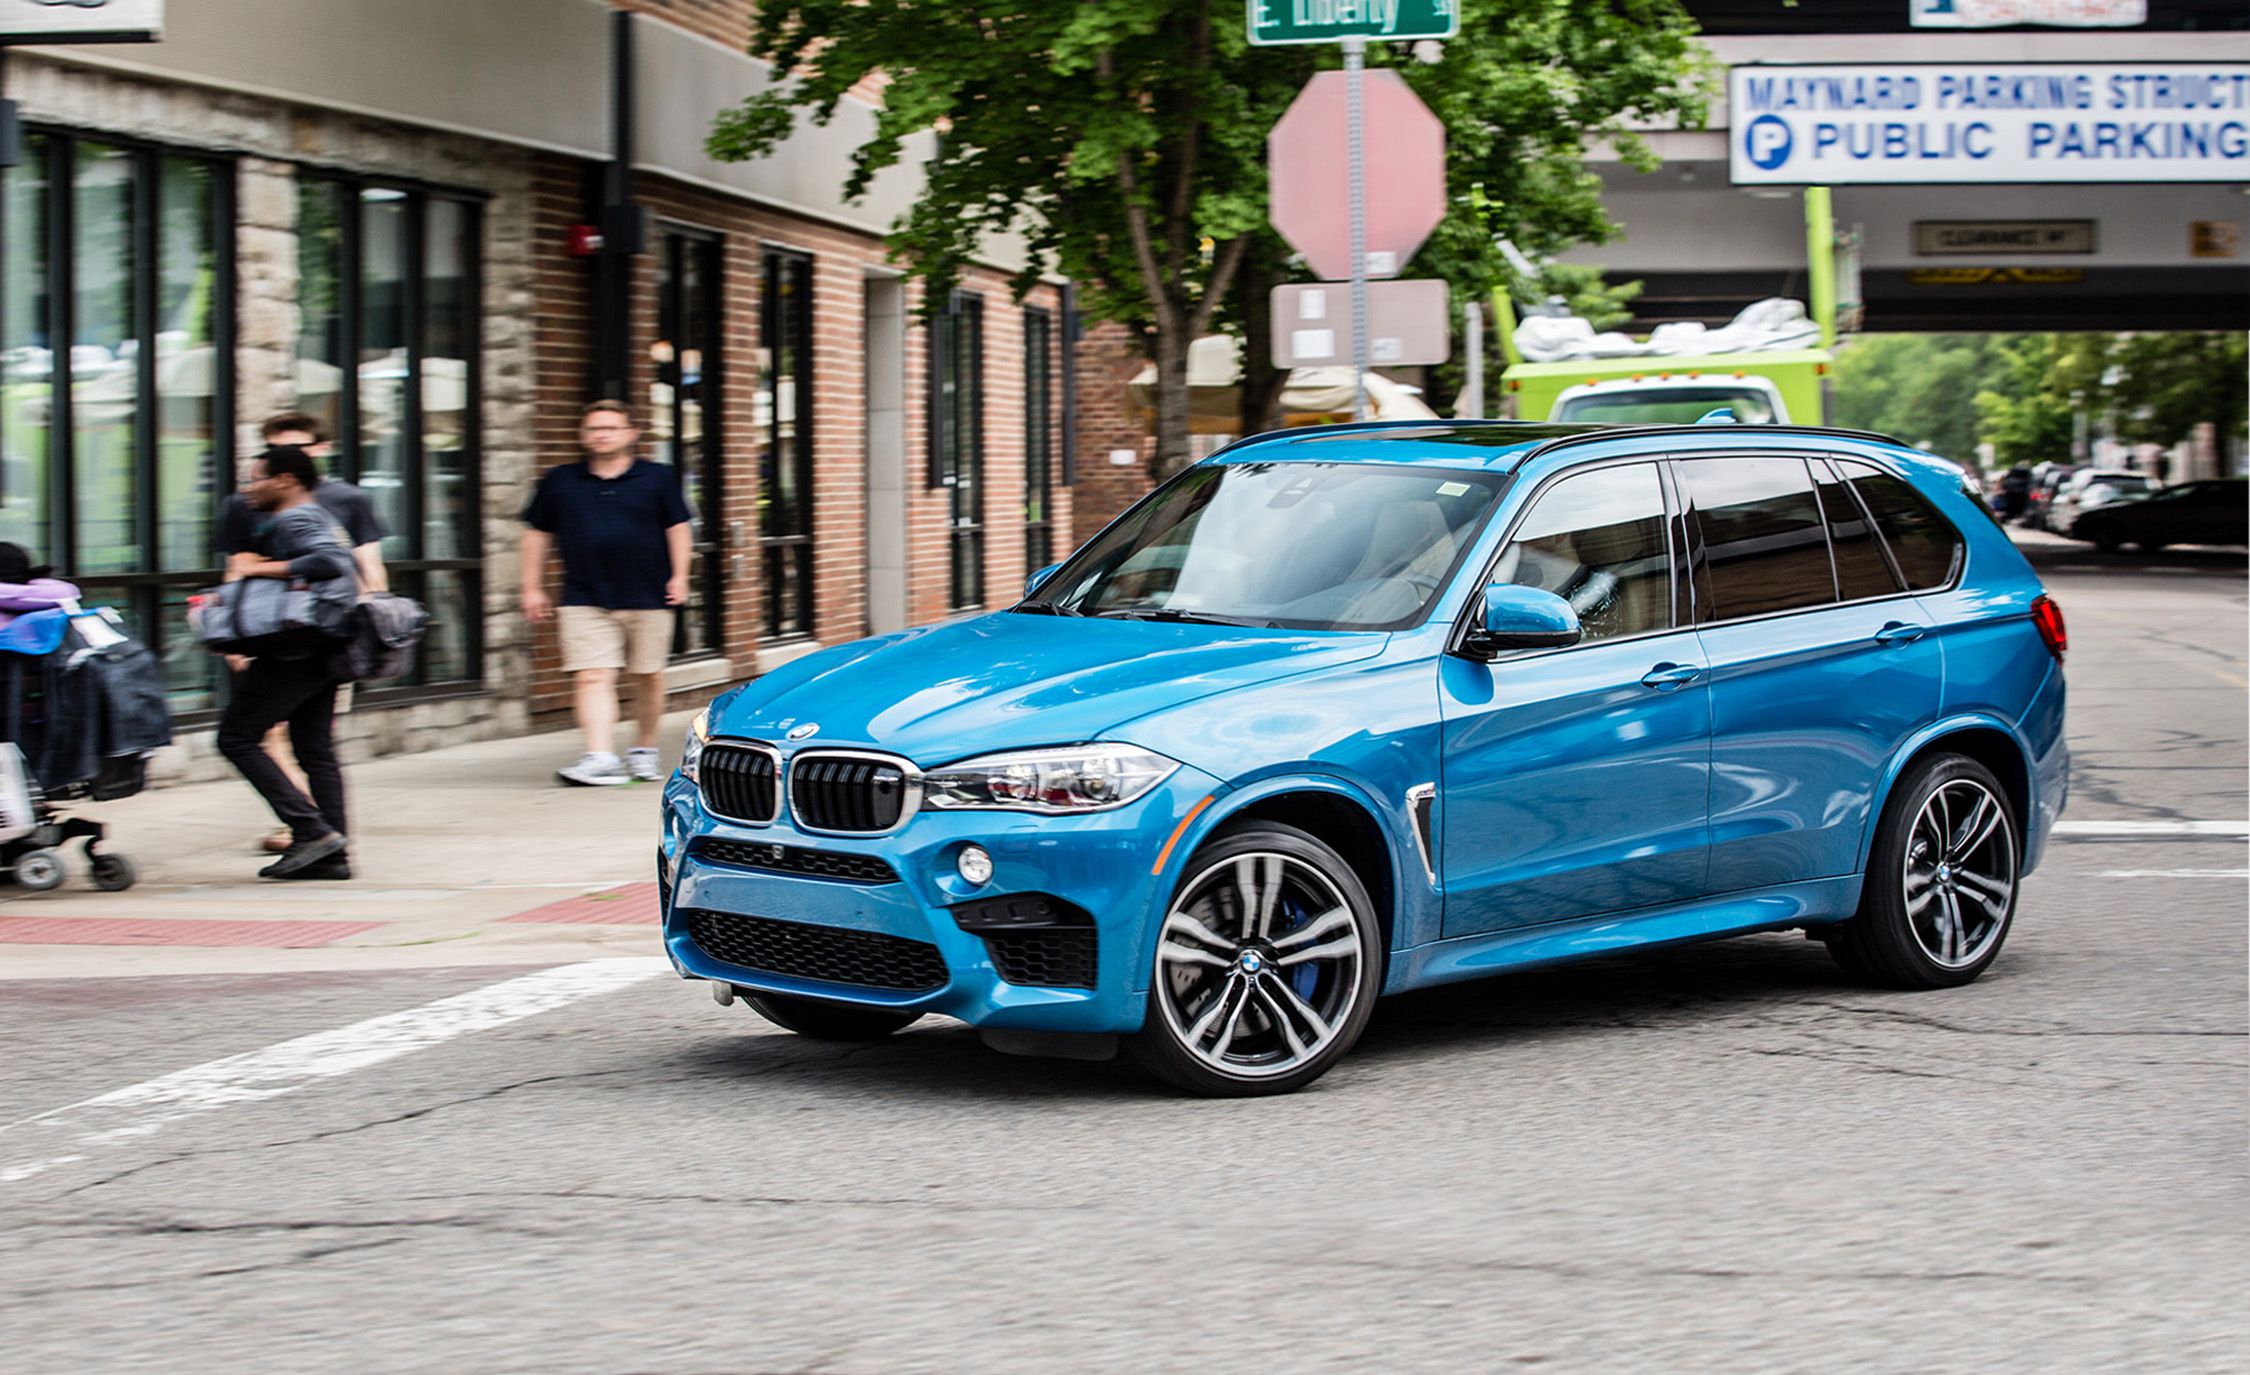 BMW X5 M Reviews | BMW X5 M Price, Photos, and Specs | Car and Driver